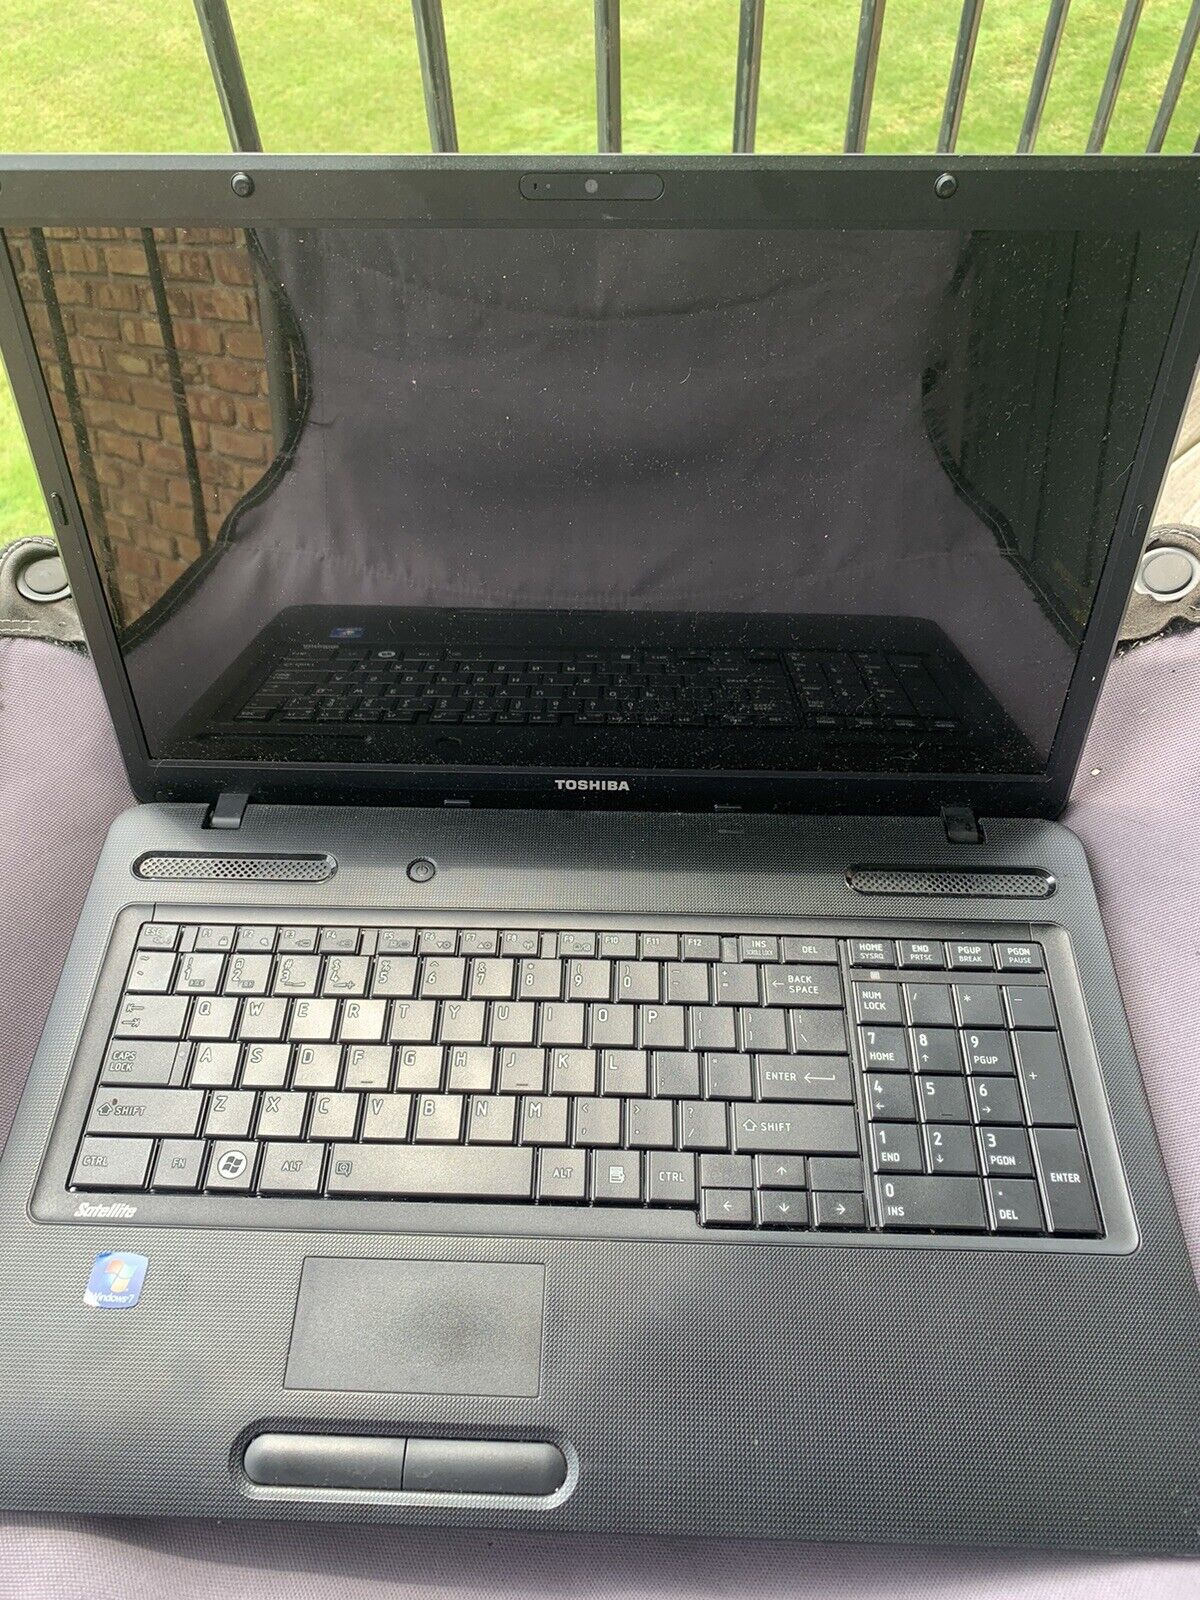 toshiba satellite laptop windows 7 With Charger. For Parts Does Charge